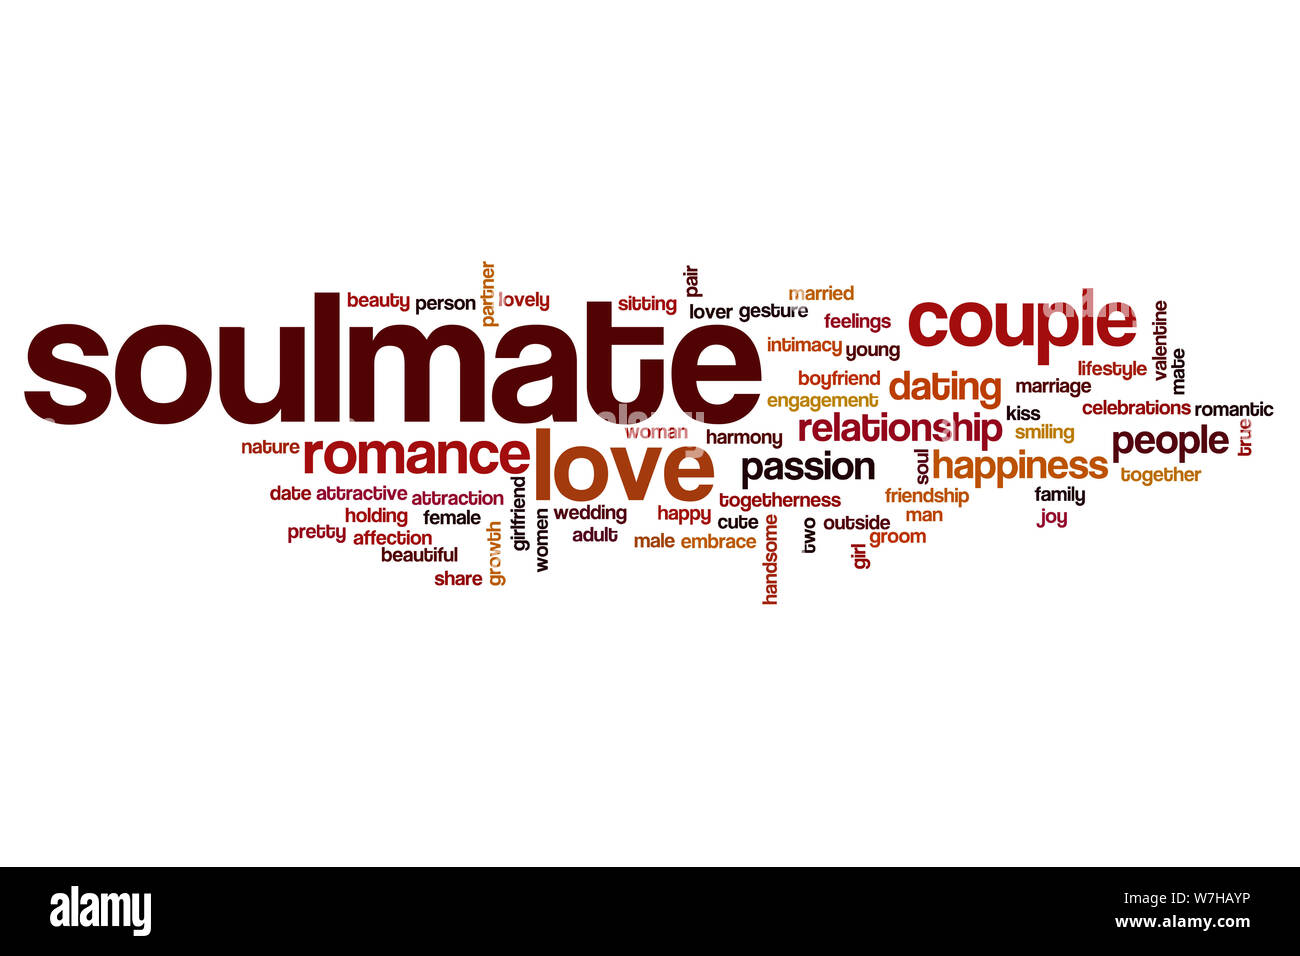 Soulmate word cloud concept Stock Photo